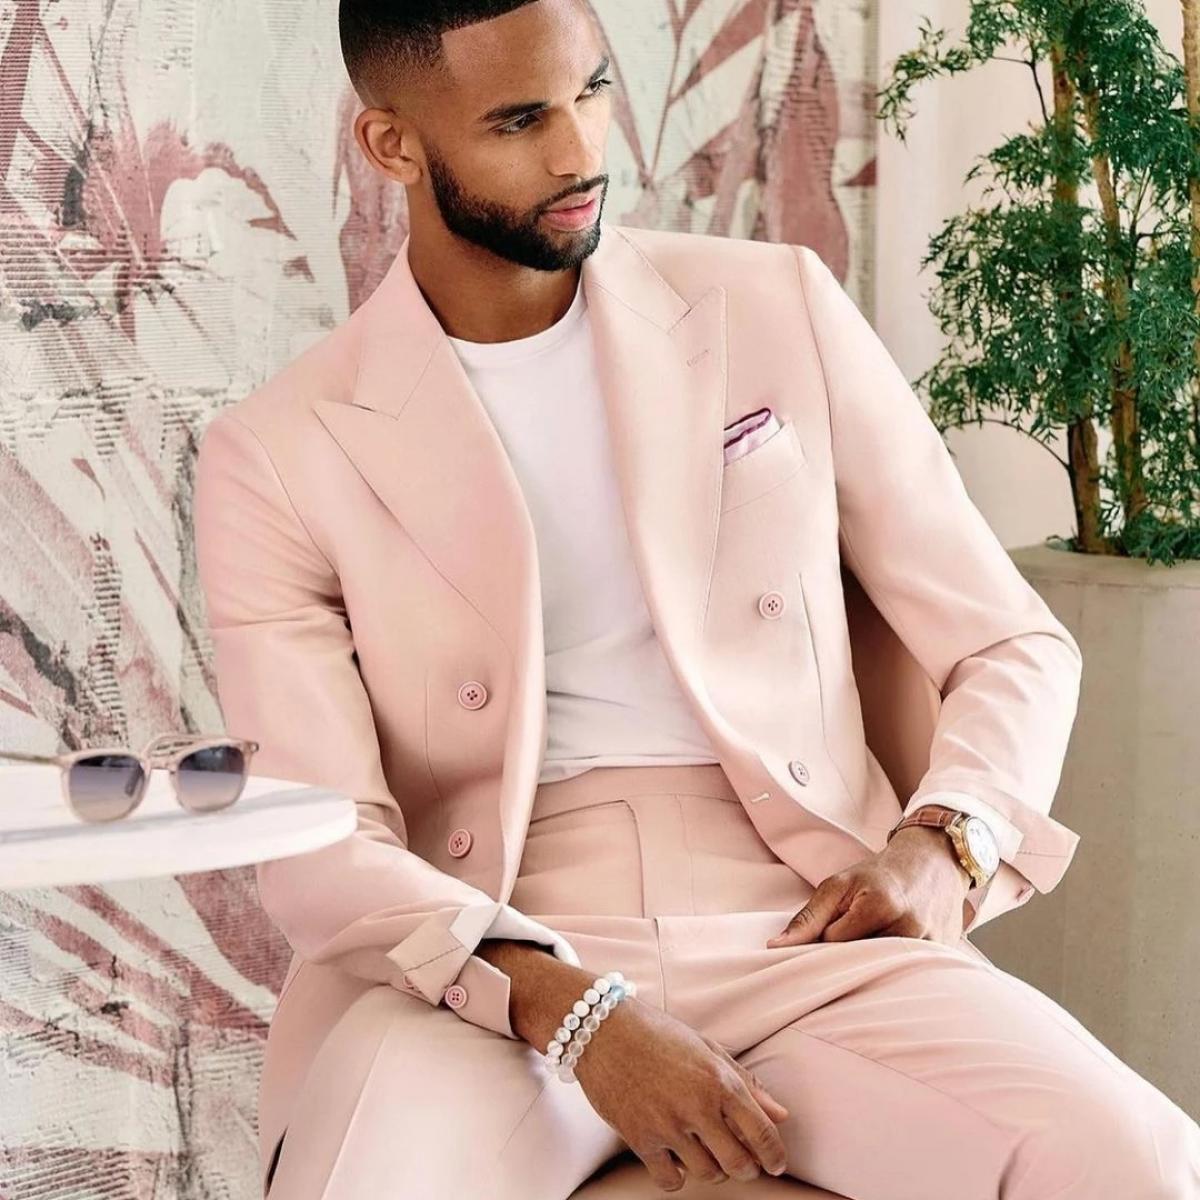 Oversized Suits Are a Big Fit for 2023 - How to Style Them